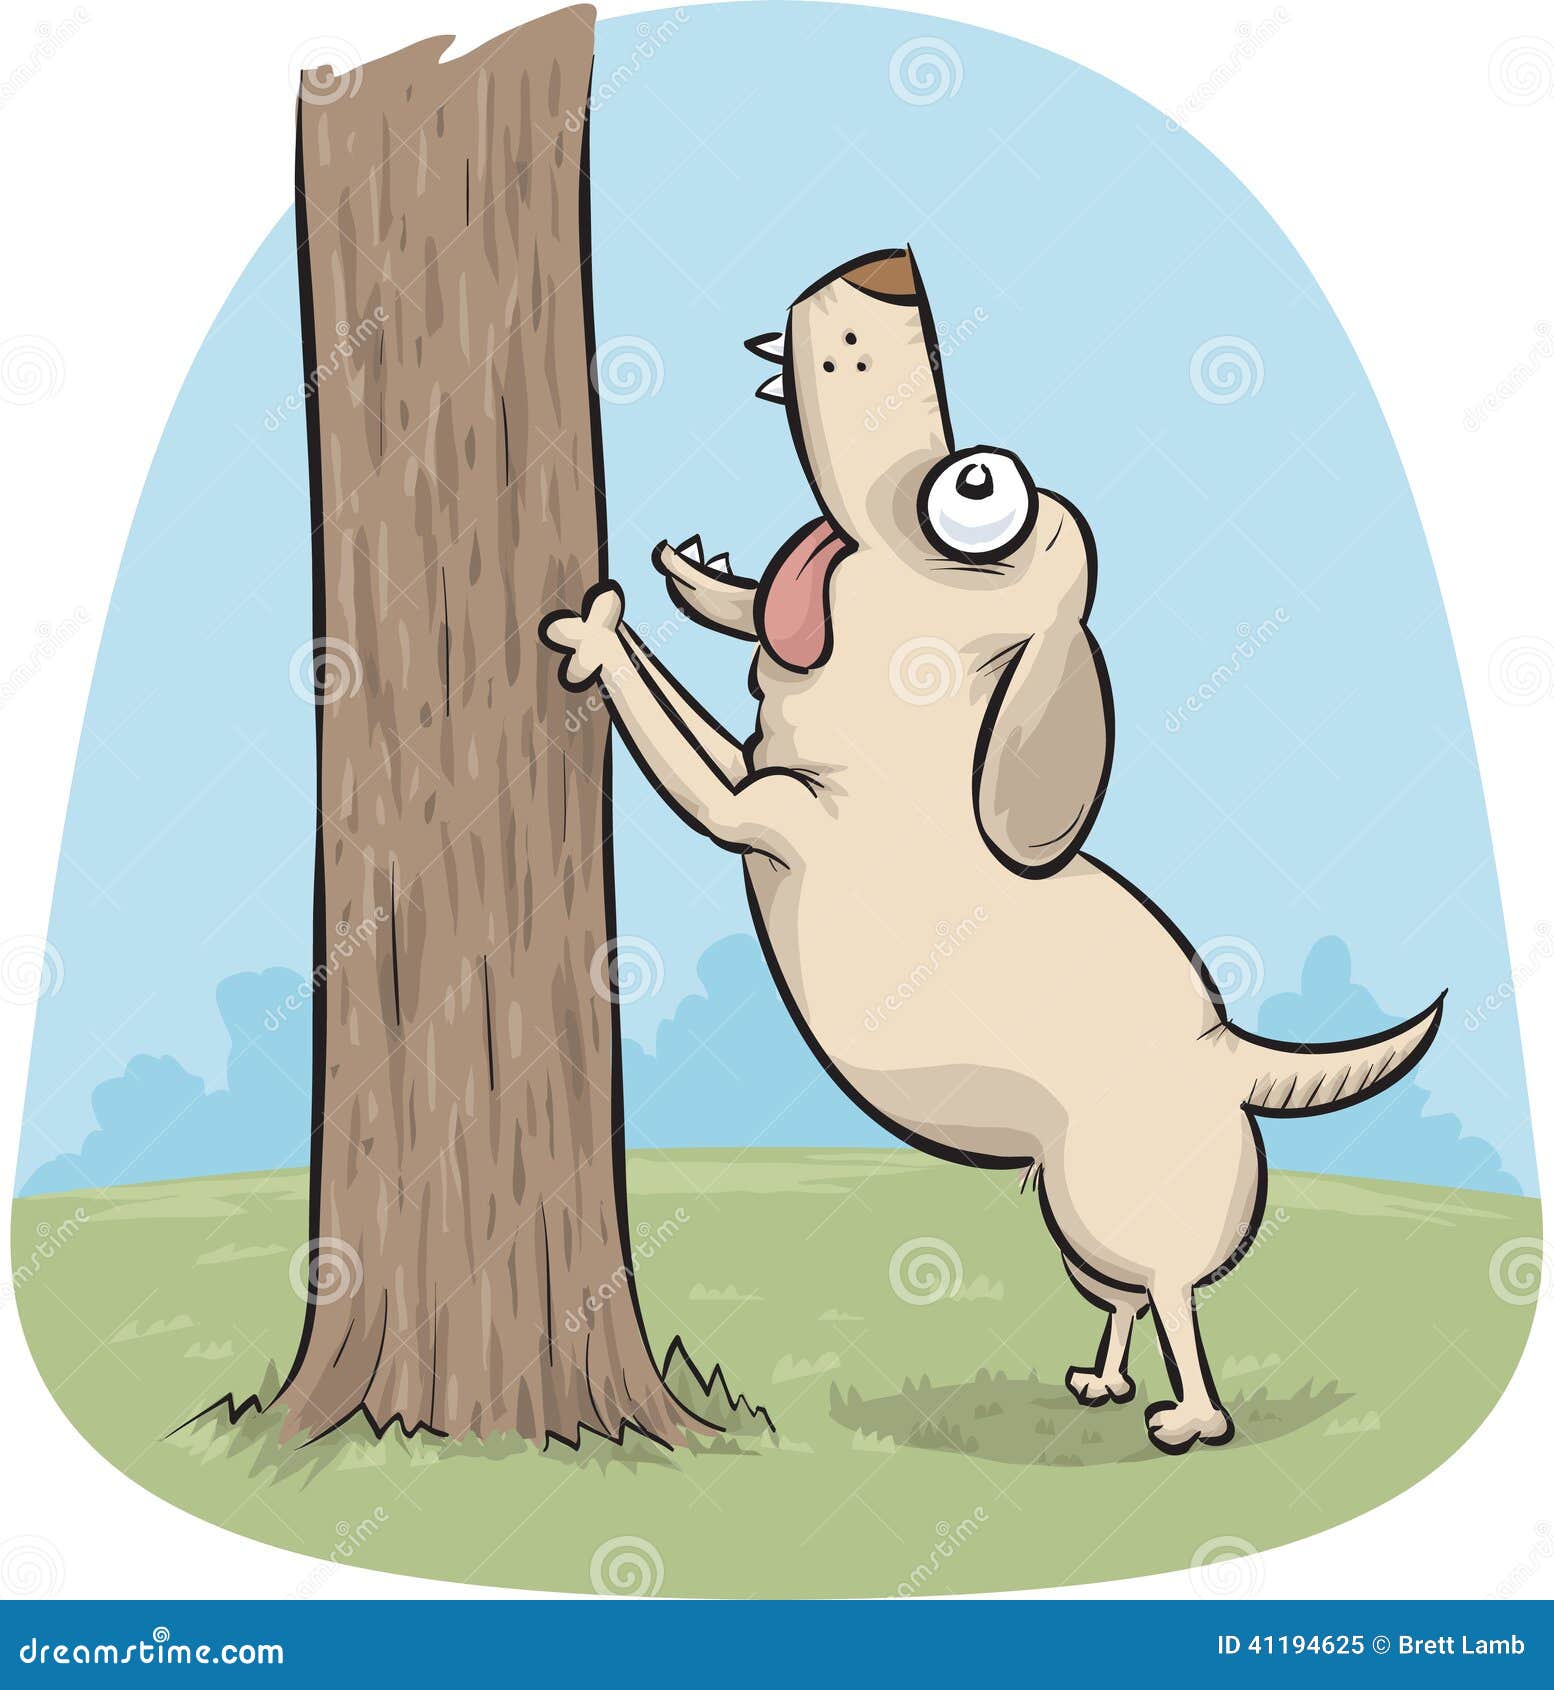 clipart of a dog barking - photo #44